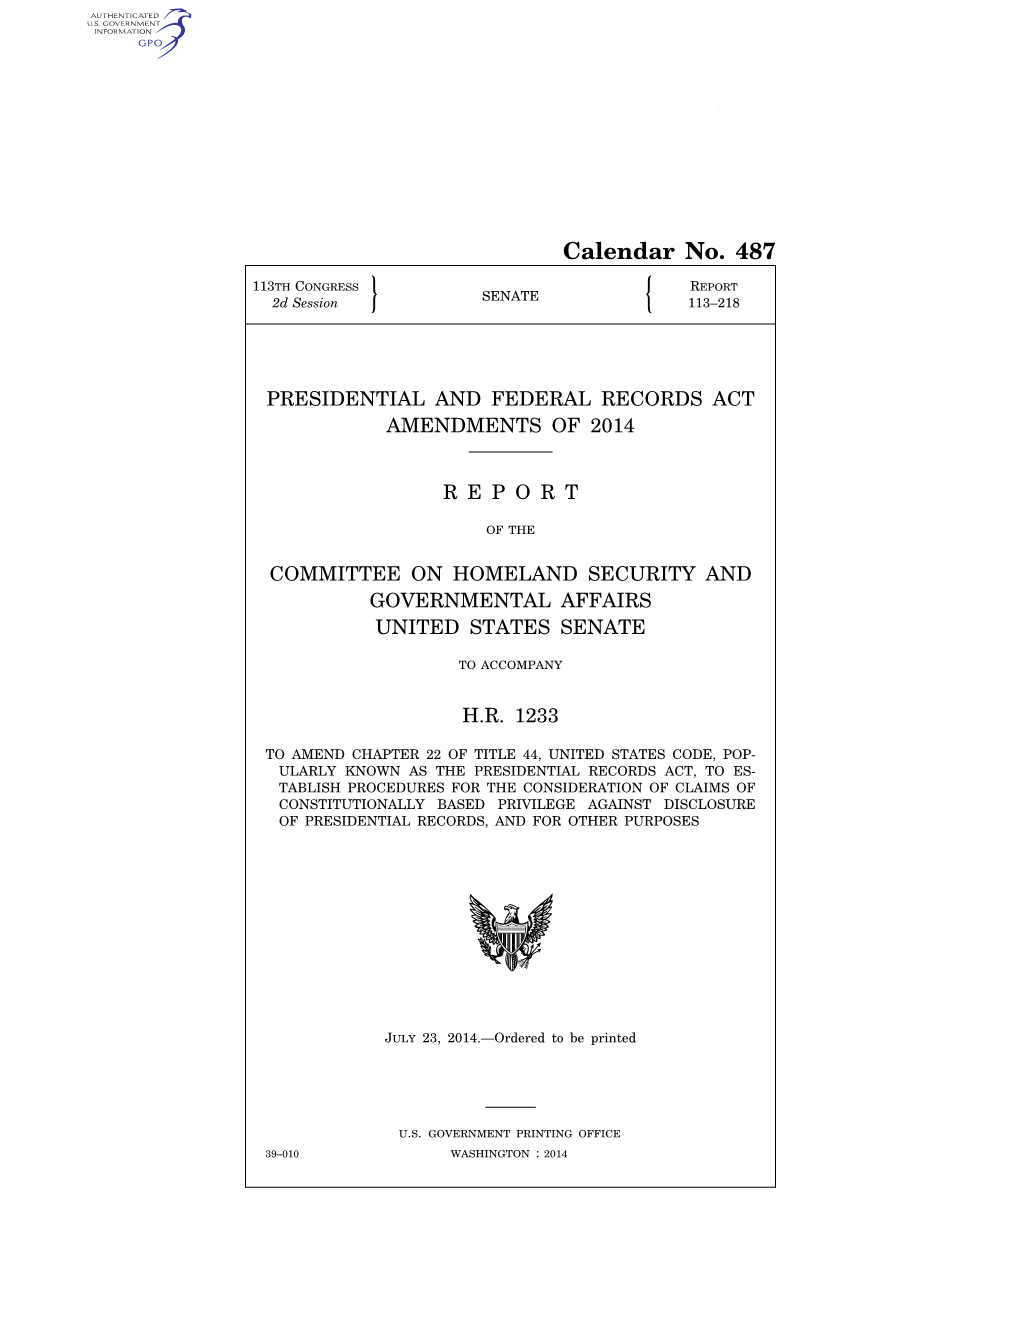 Presidential and Federal Records Act Amendments of 2014